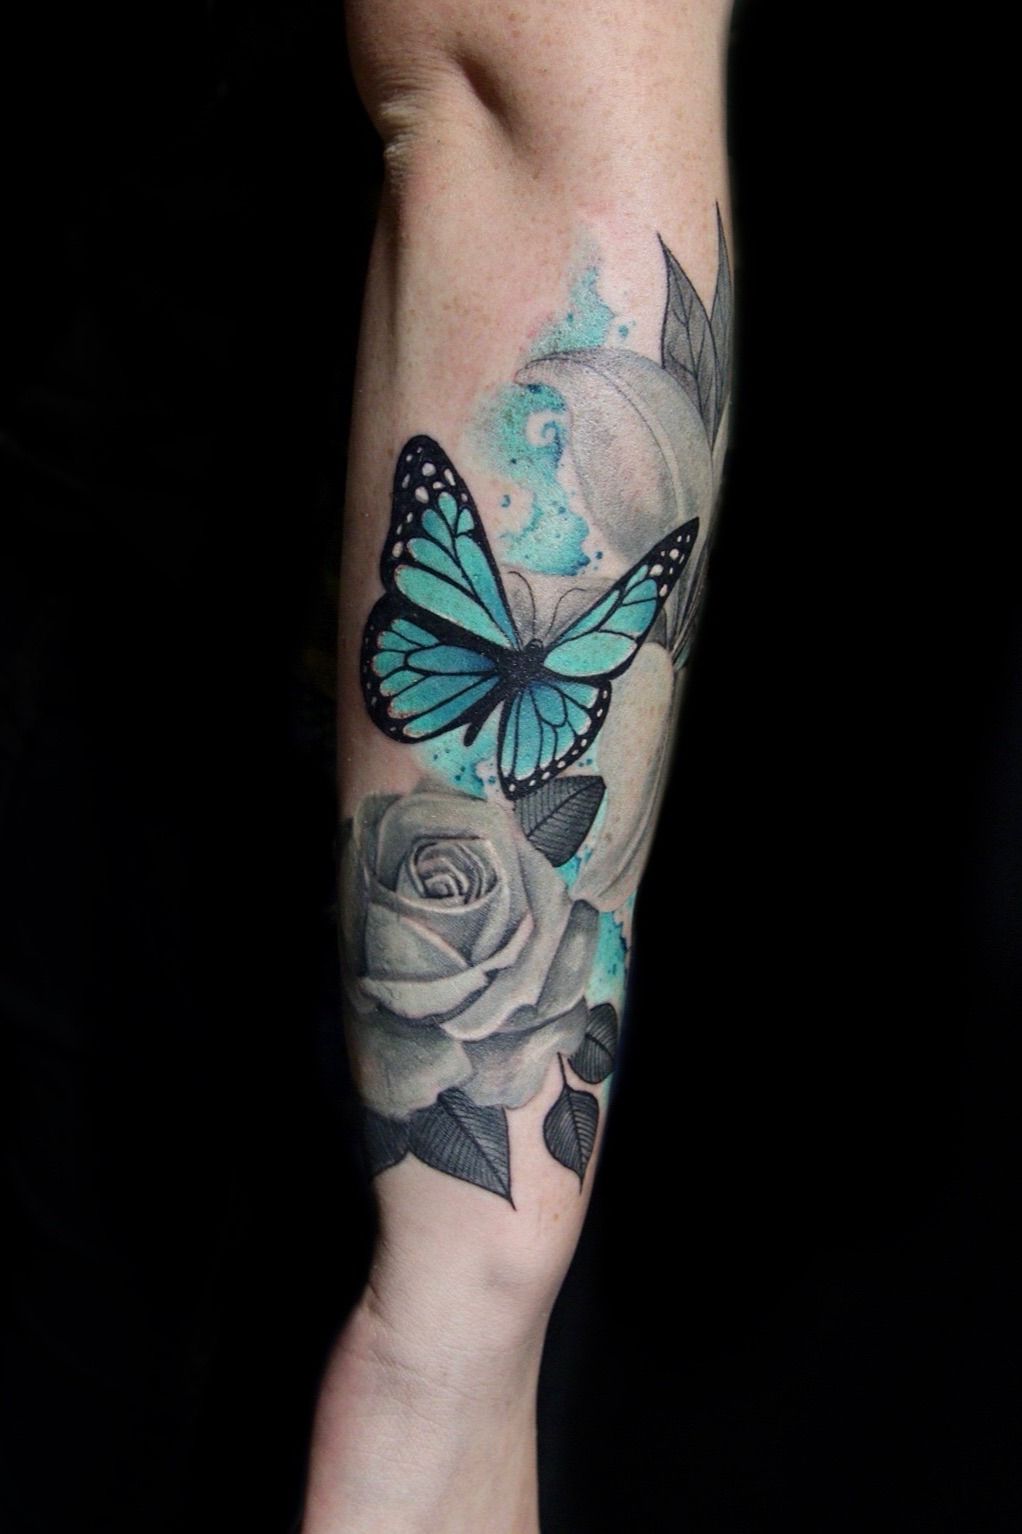 Emerald Tattoo Company UK on Twitter Black and grey butterfly  samfishertattoos did last year at the studio emeraldtattoocompany  emeraldtattoo talbotgreen cardiff southwales butterfly butterflies  butterflytattoo blackandgreytattoo 